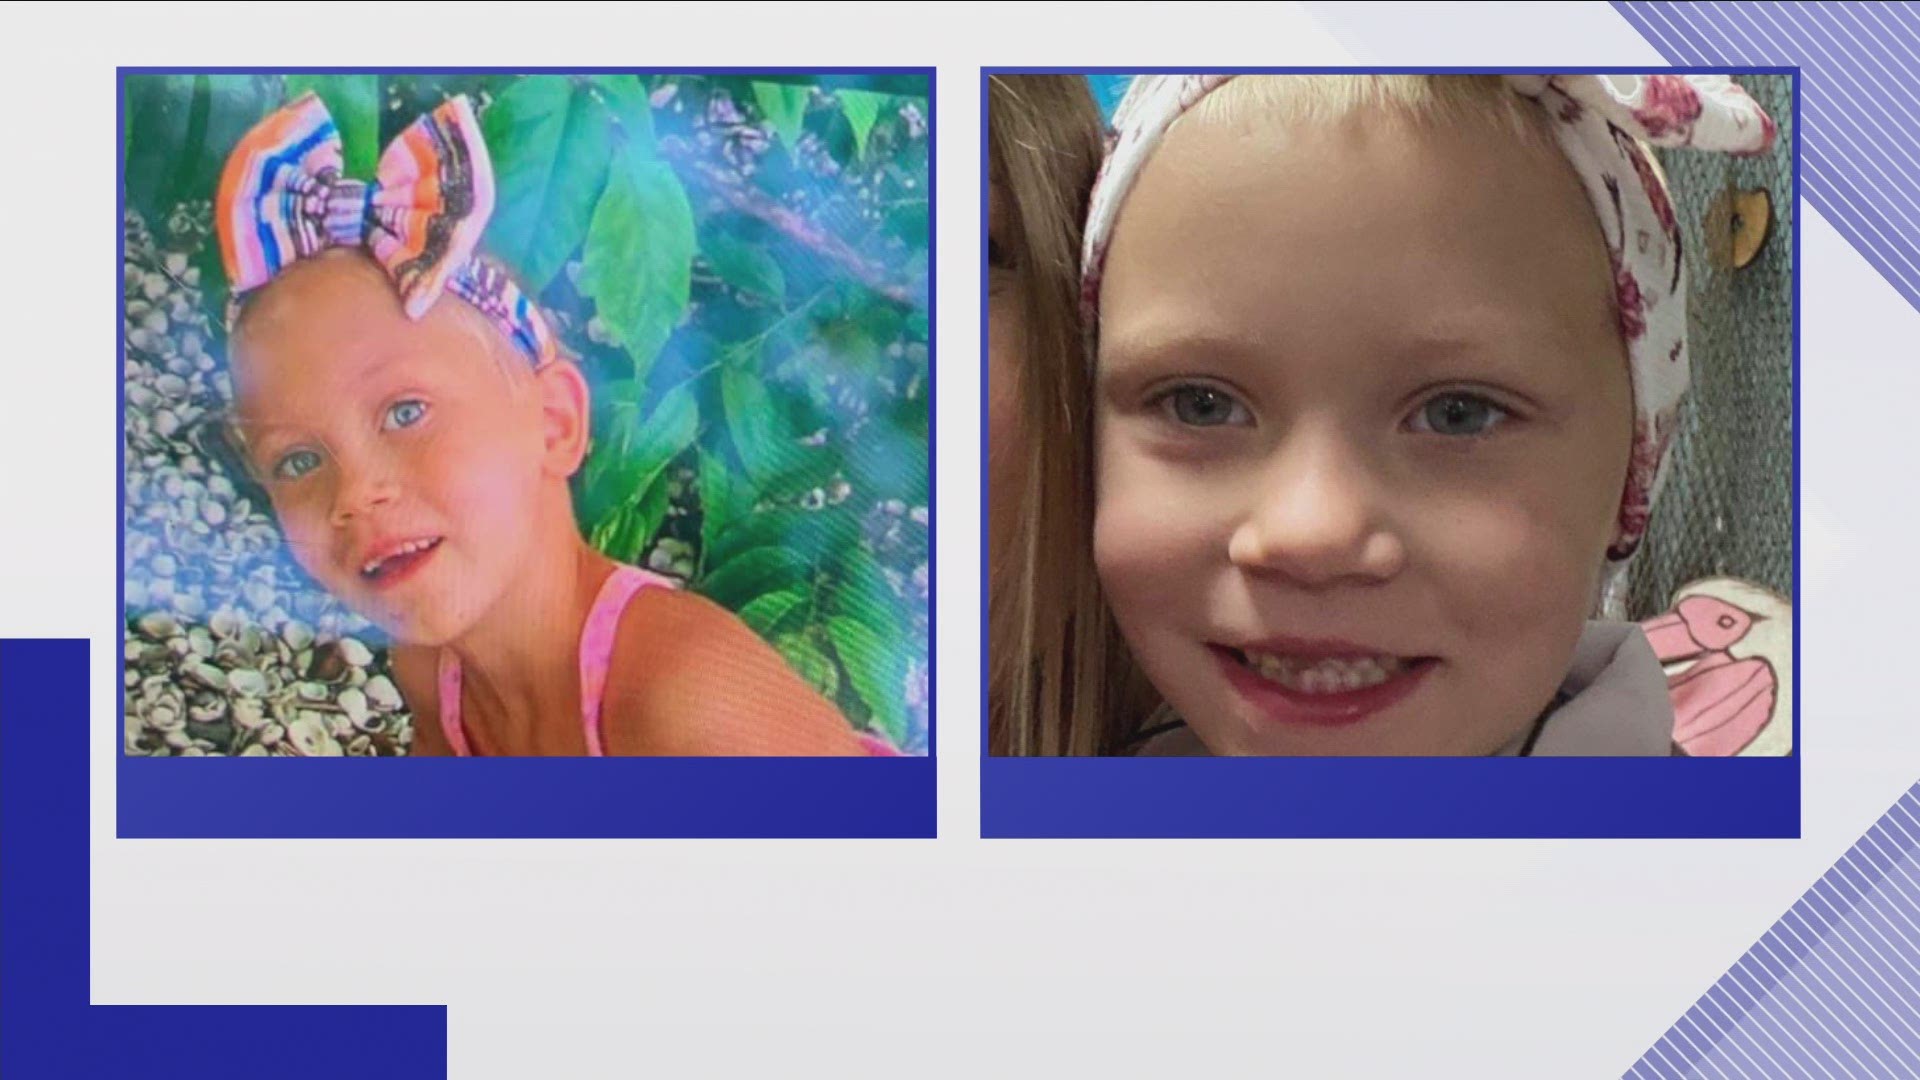 A statewide AMBER Alert was still in effect Wednesday night for a missing 5-year-old girl in Hawkins County.